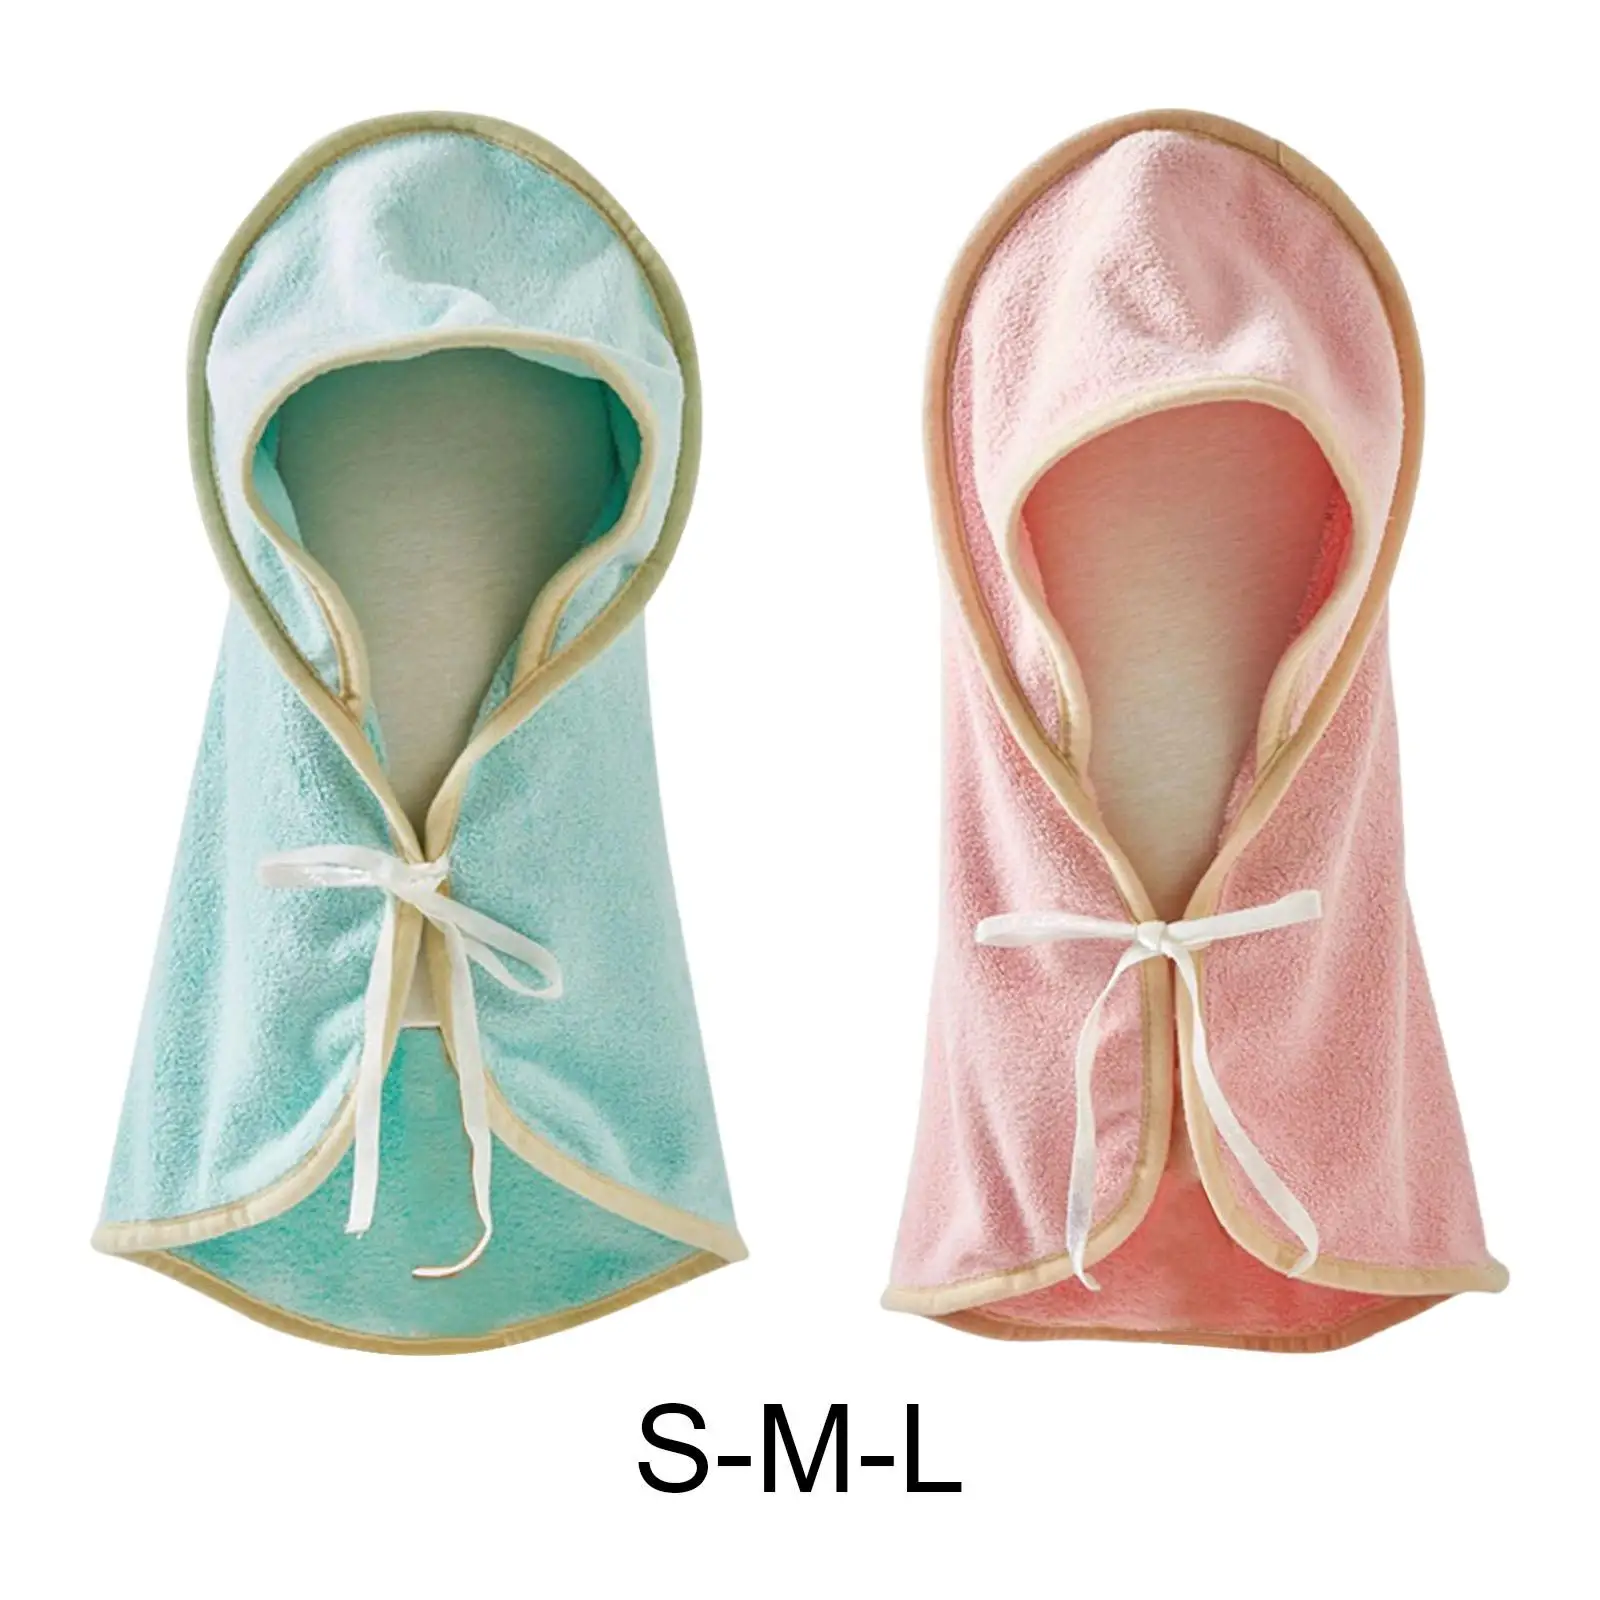 Soft Dog Bathrobe Pet Drying Towel Super Absorbent Microfibre Clothes Bath Robe Hoodies Grooming Accessories